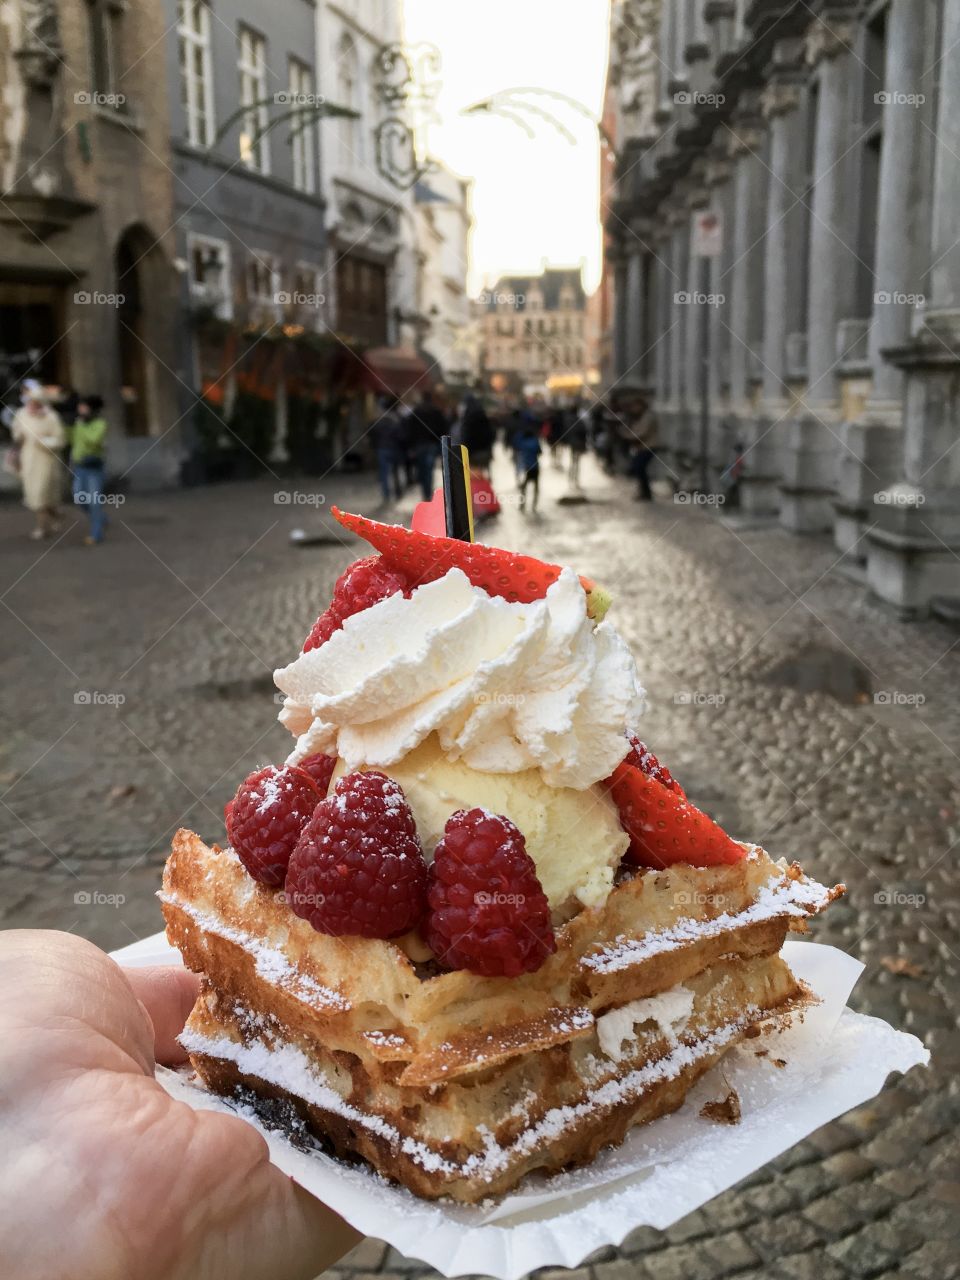 A tasty Belgian waffle on the streets of Brugge